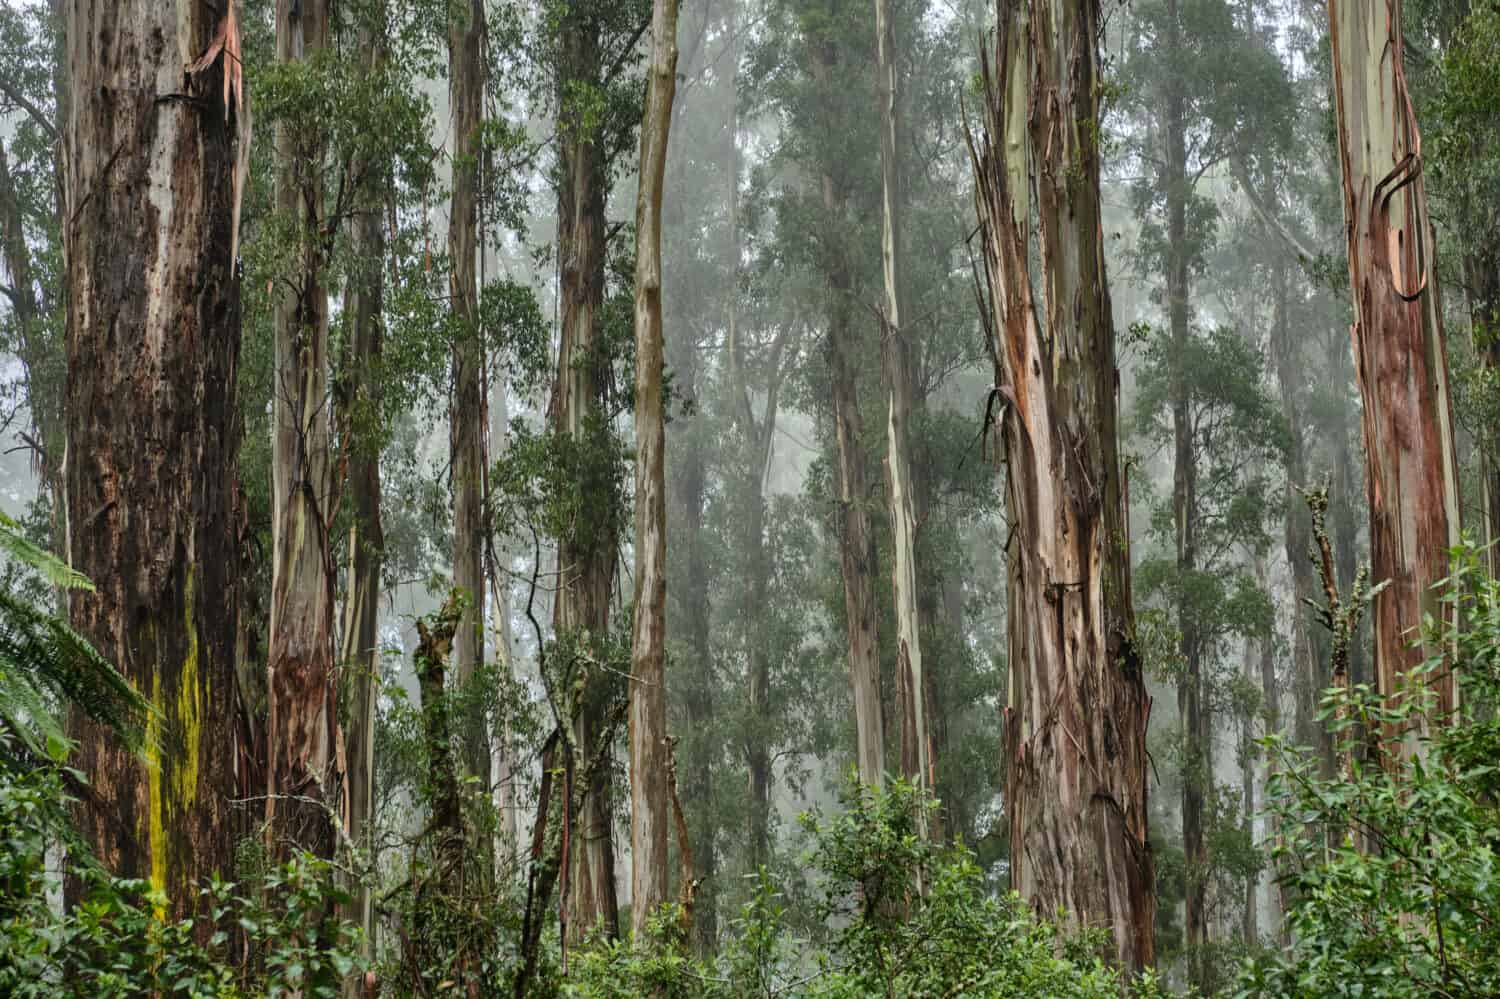 Australian Mountain Ash, Eucalyptus regnans, known variously as mountain ash, swamp gum, or stringy gum, is a species of medium-sized to very tall forest tree that is native to Tasmania and Victoria,